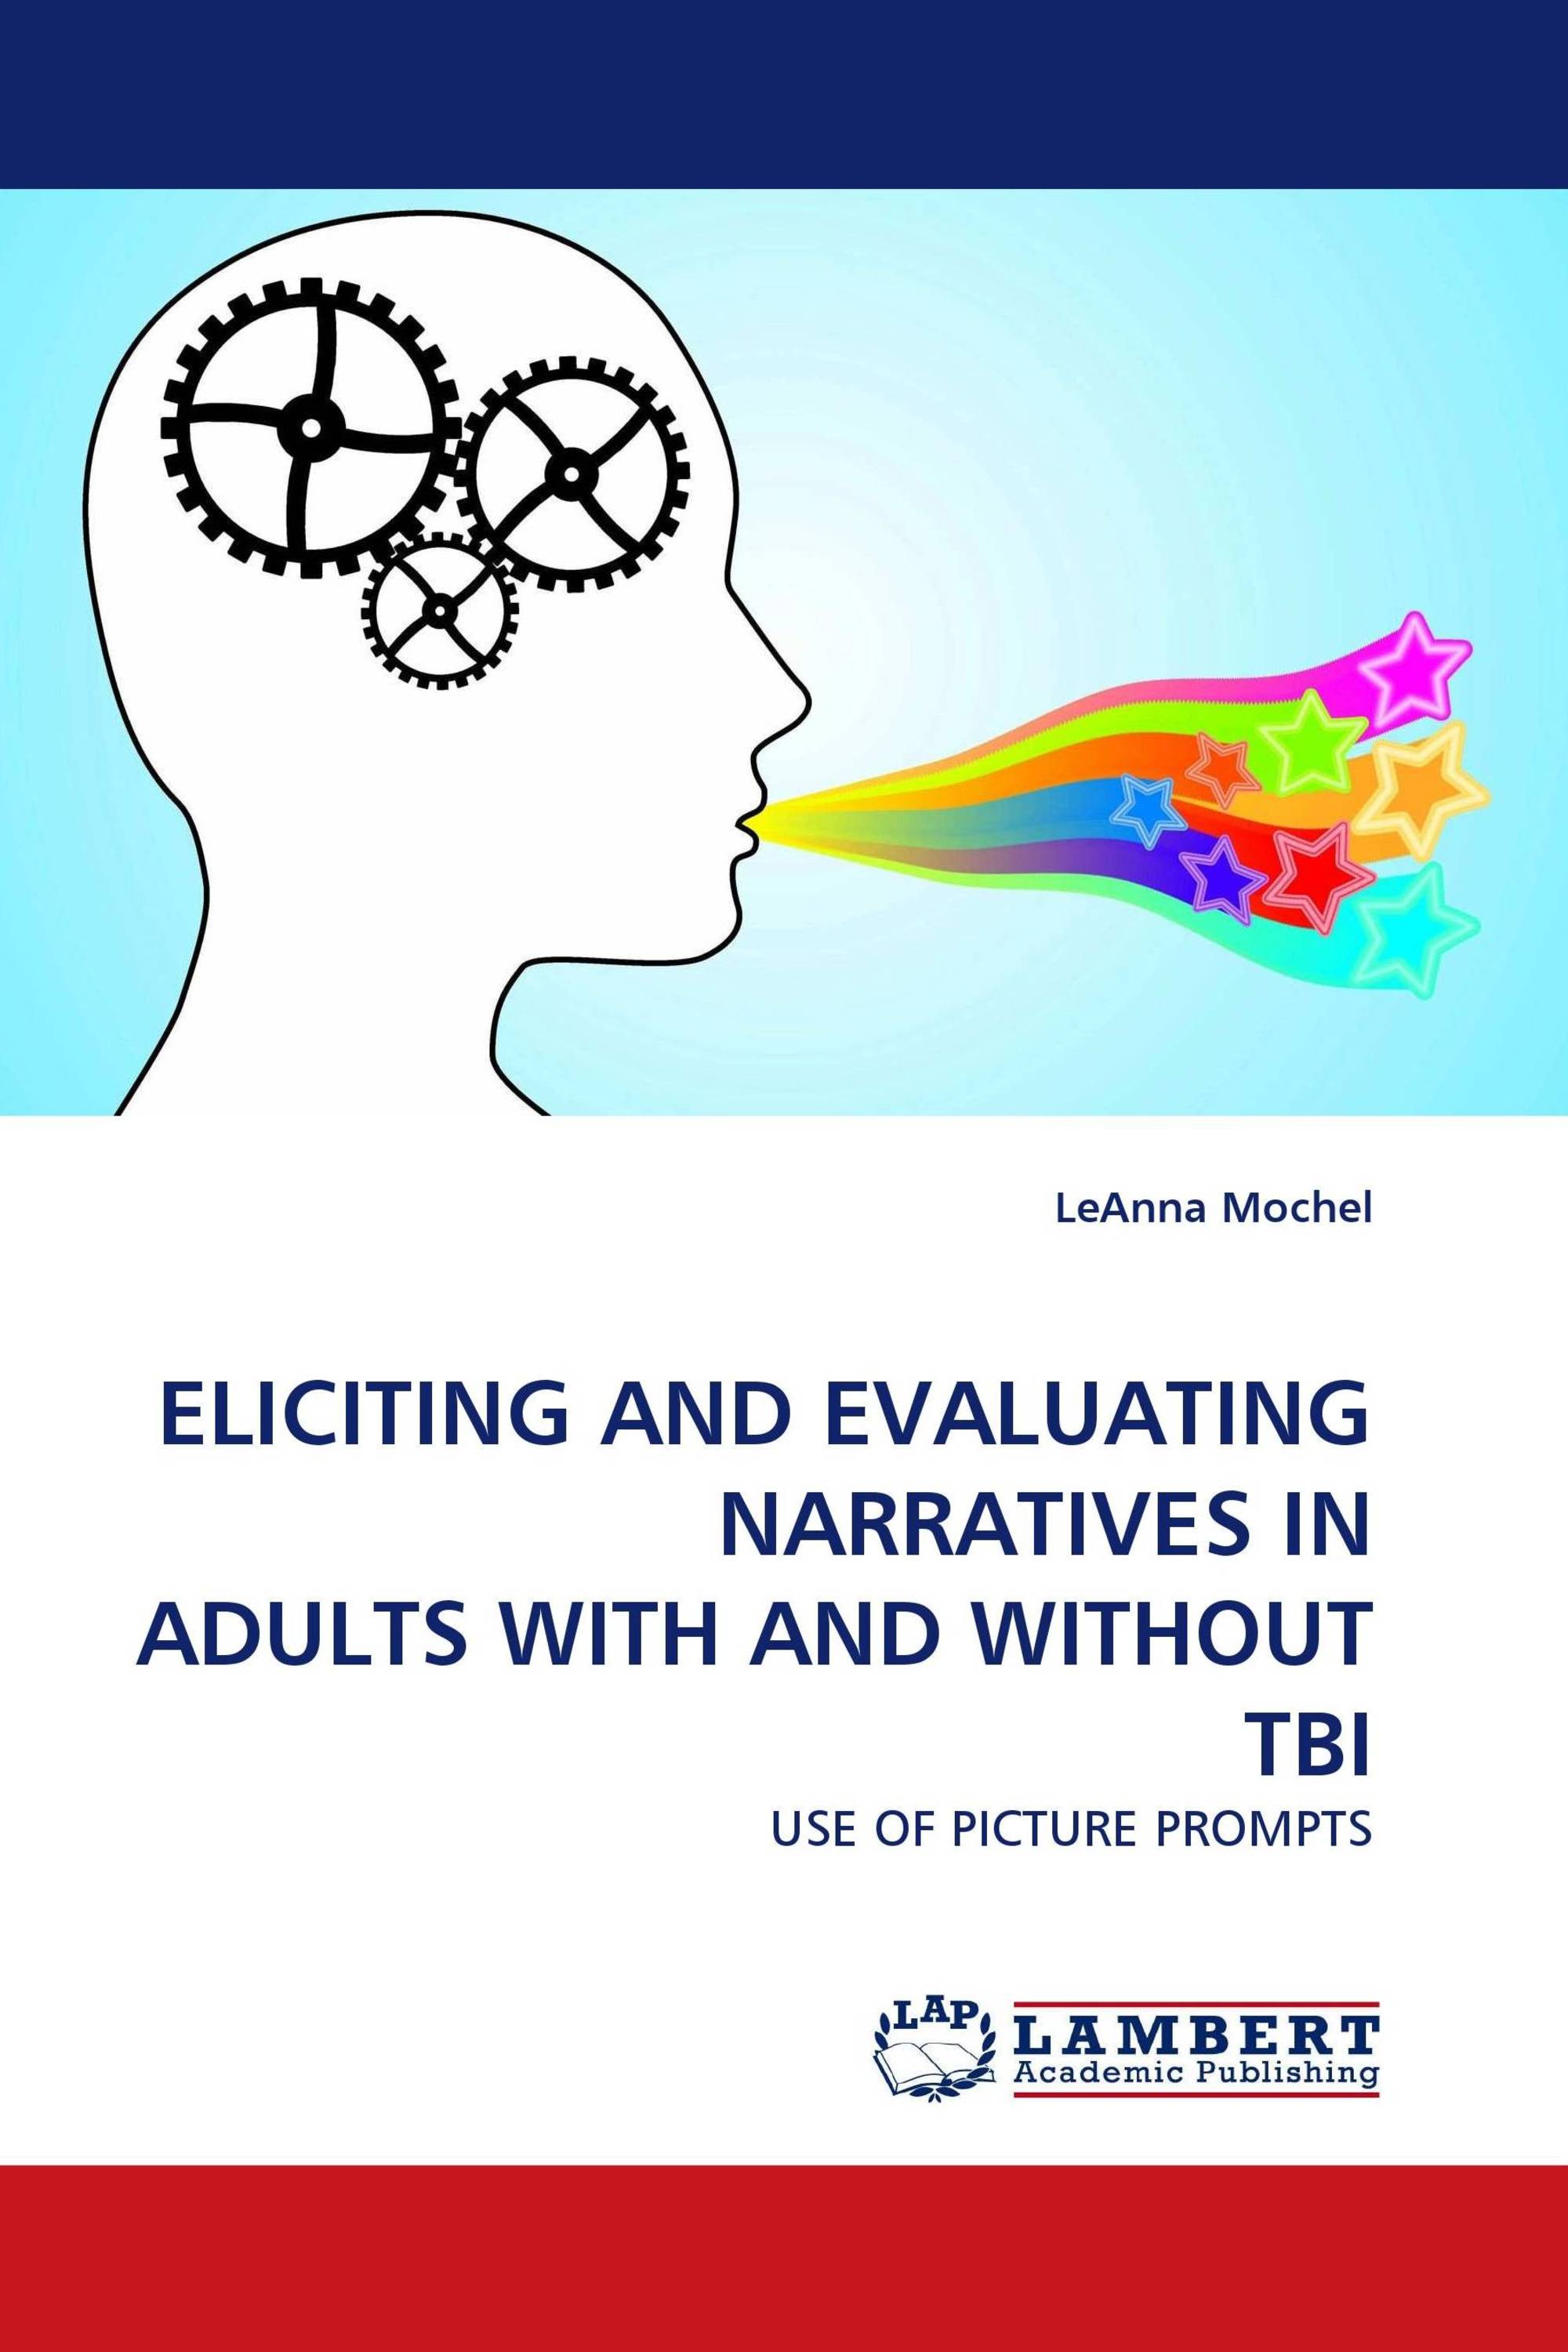 ELICITING AND EVALUATING NARRATIVES IN ADULTS WITH AND WITHOUT TBI